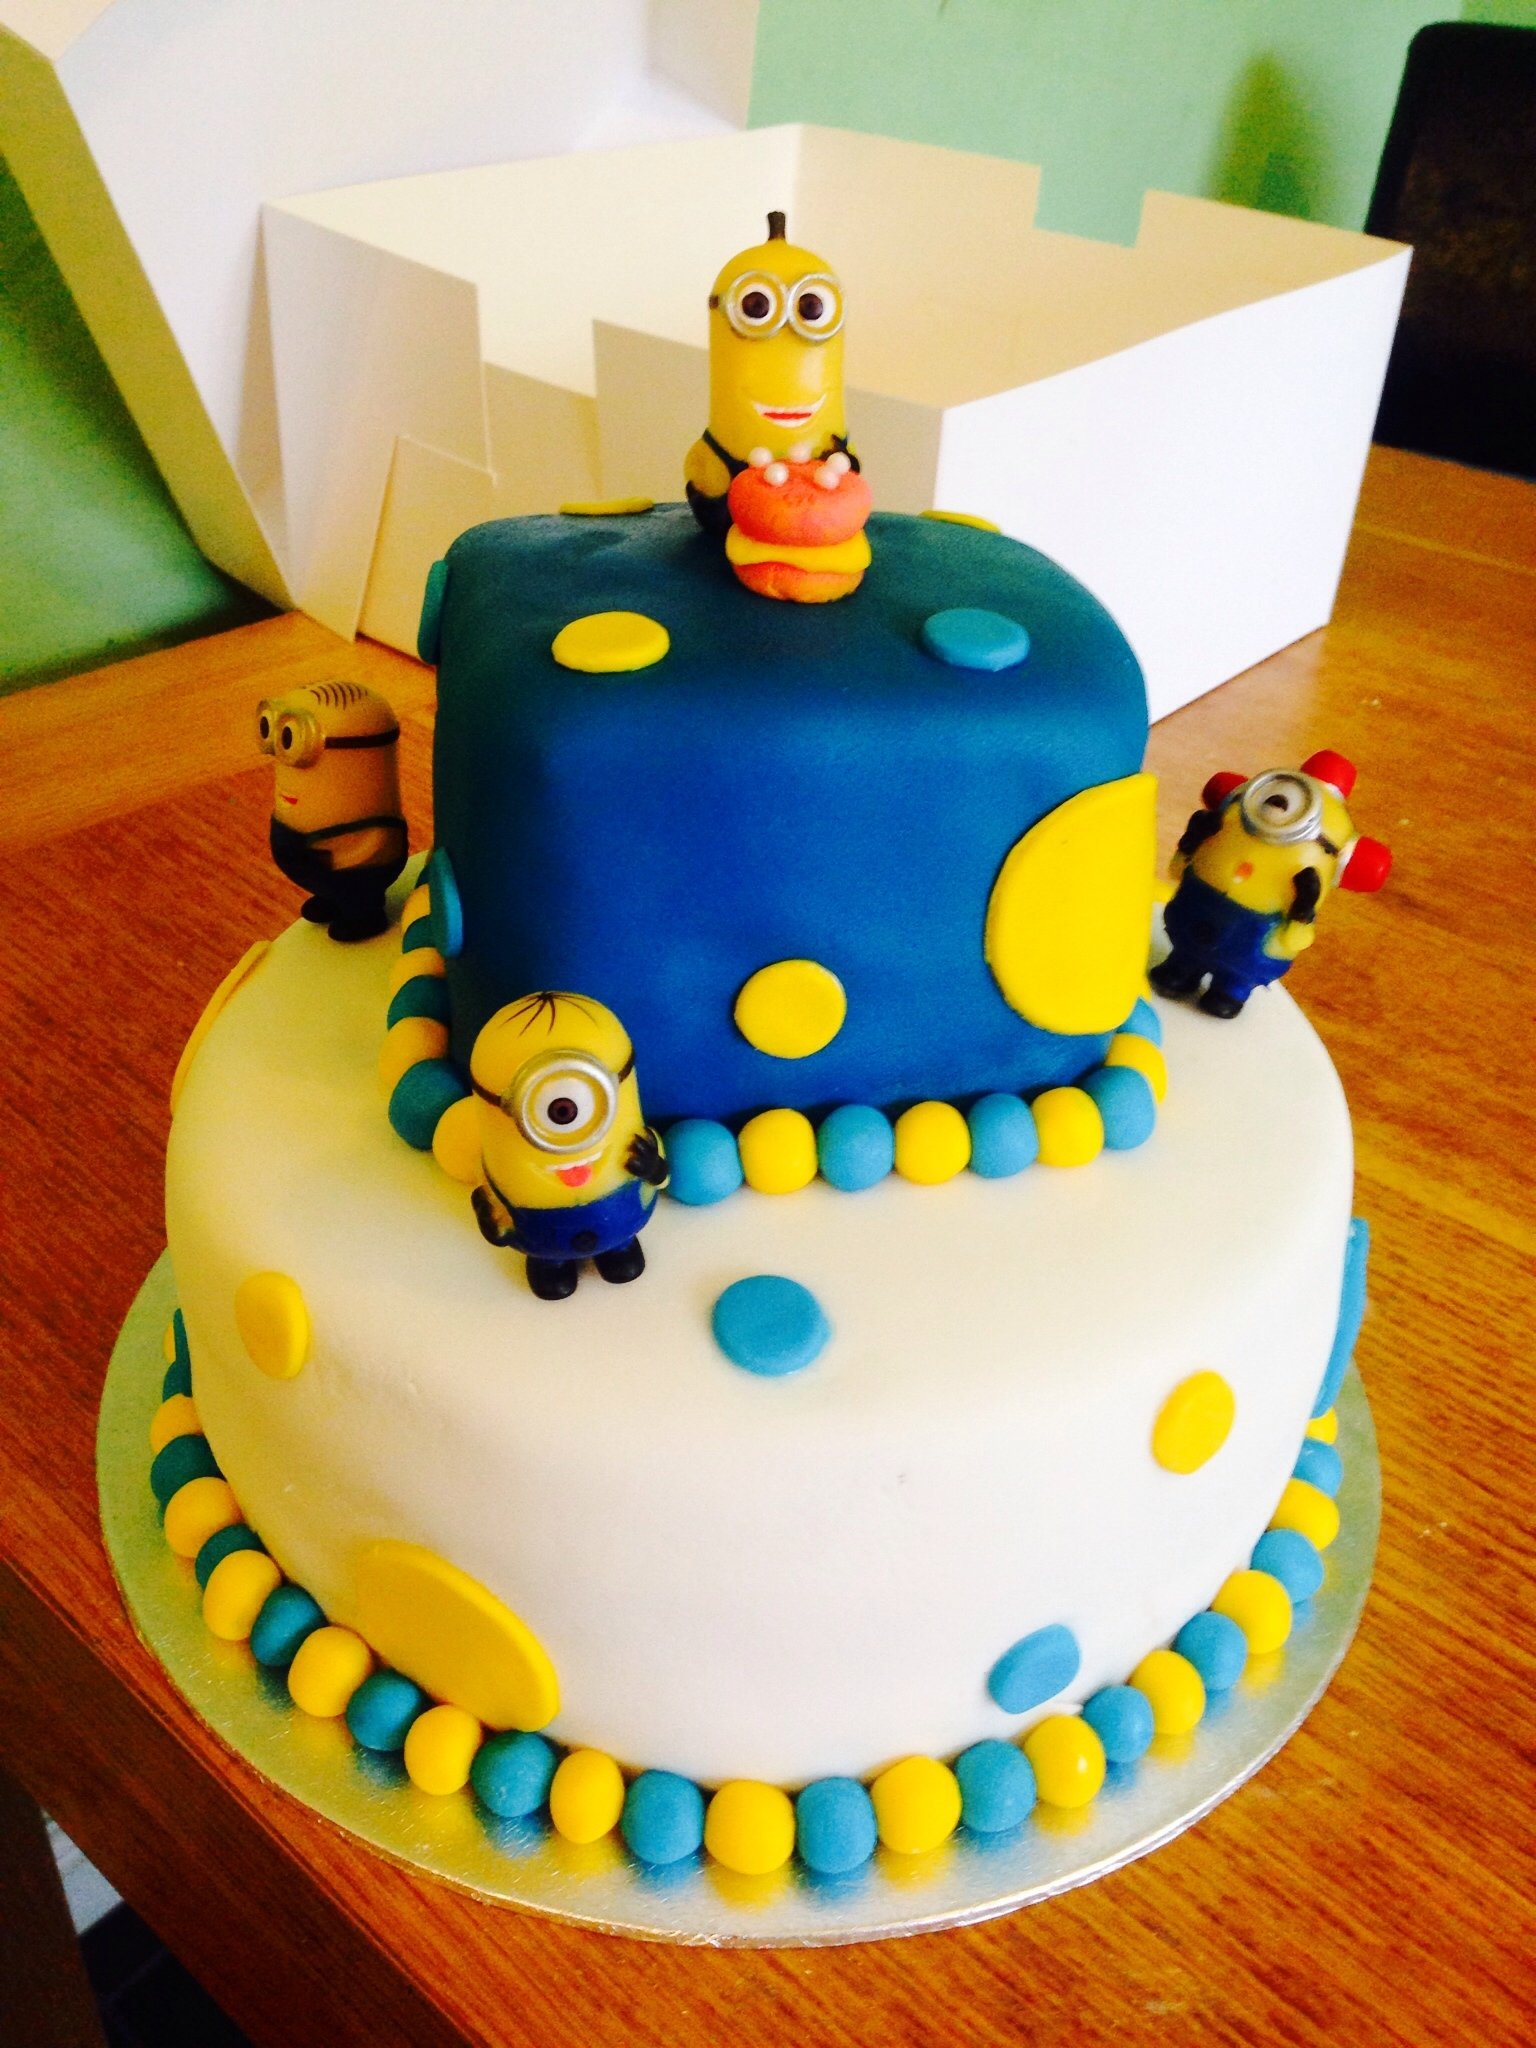 10 Lovable Despicable Me 2 Cake Ideas 2 tier despicable me minion cake sponge is marble with both 2022